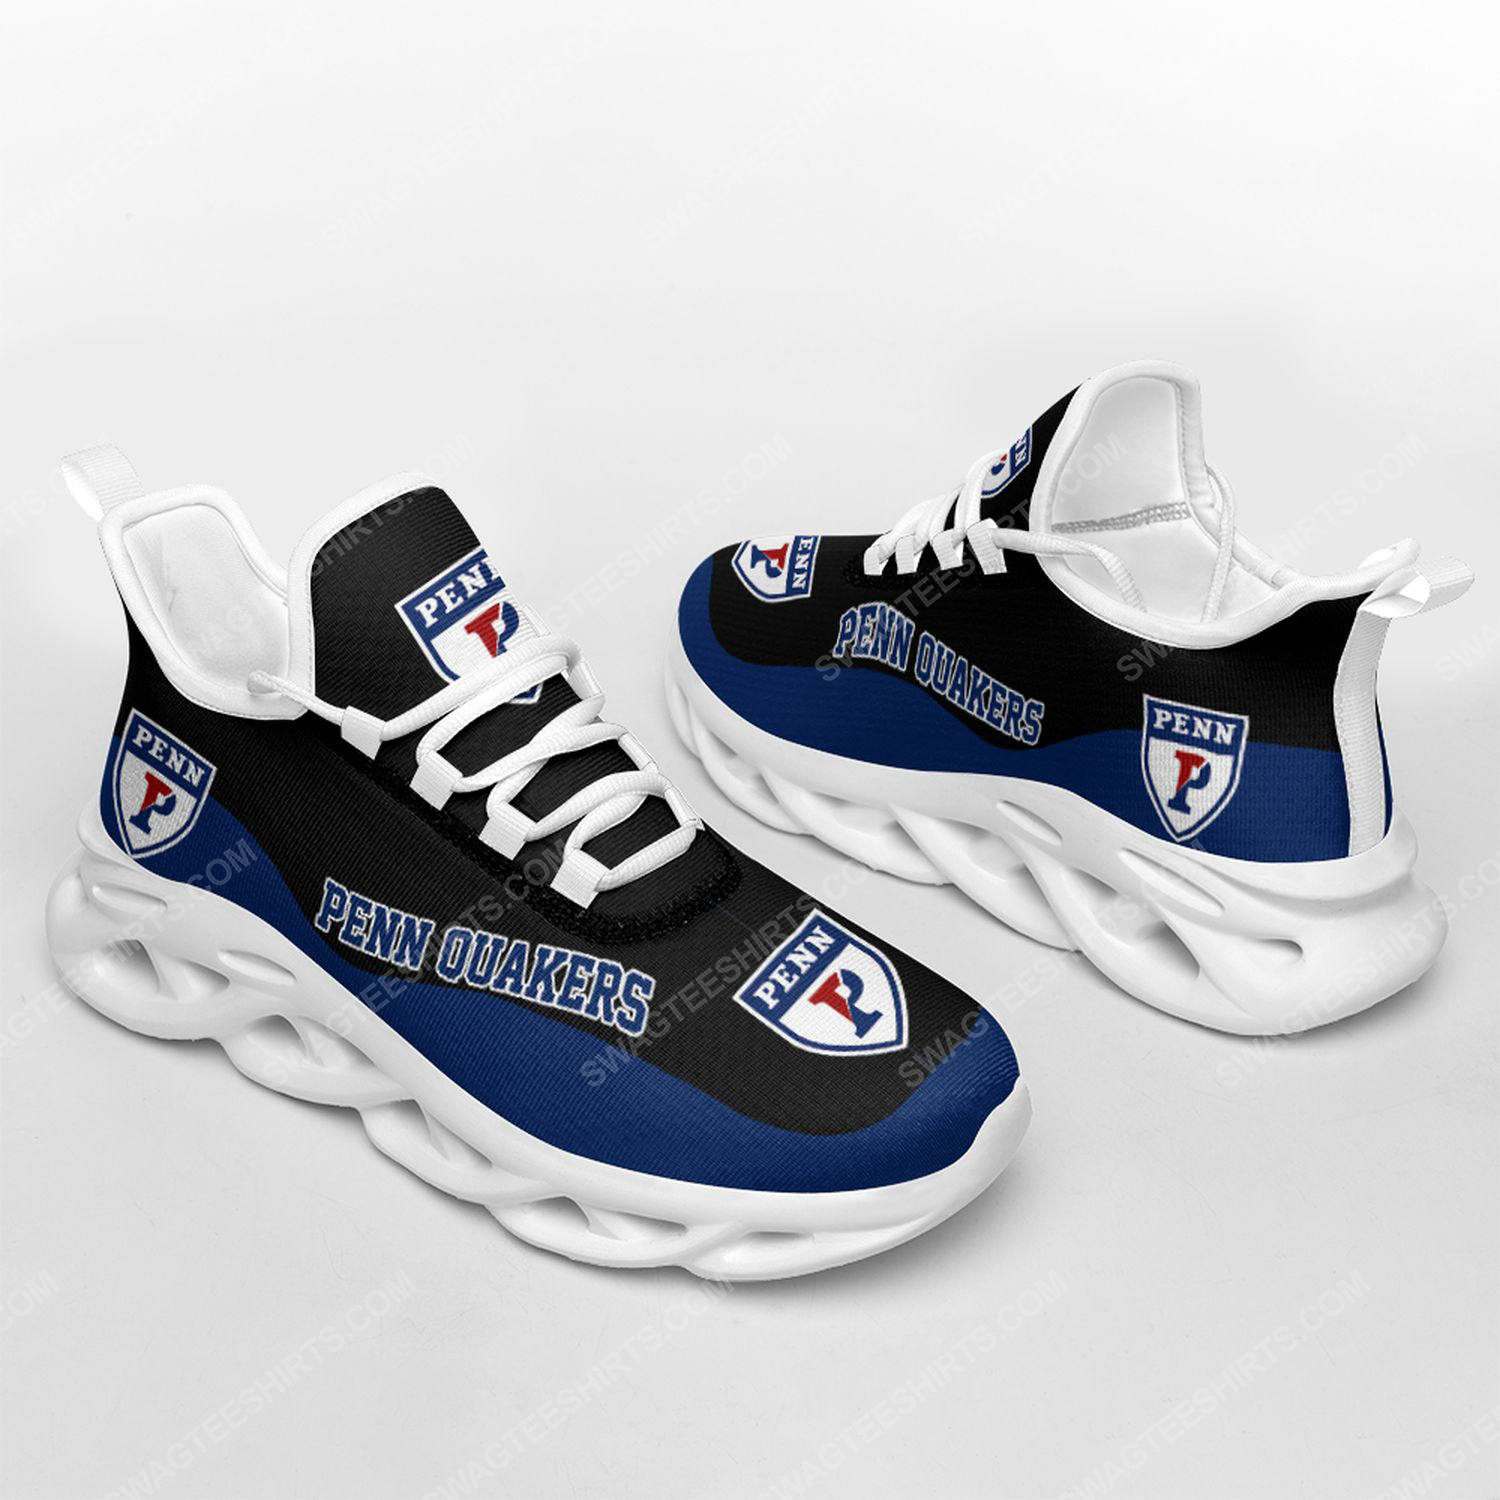 [special edition] The penn quakers football team max soul shoes – Maria